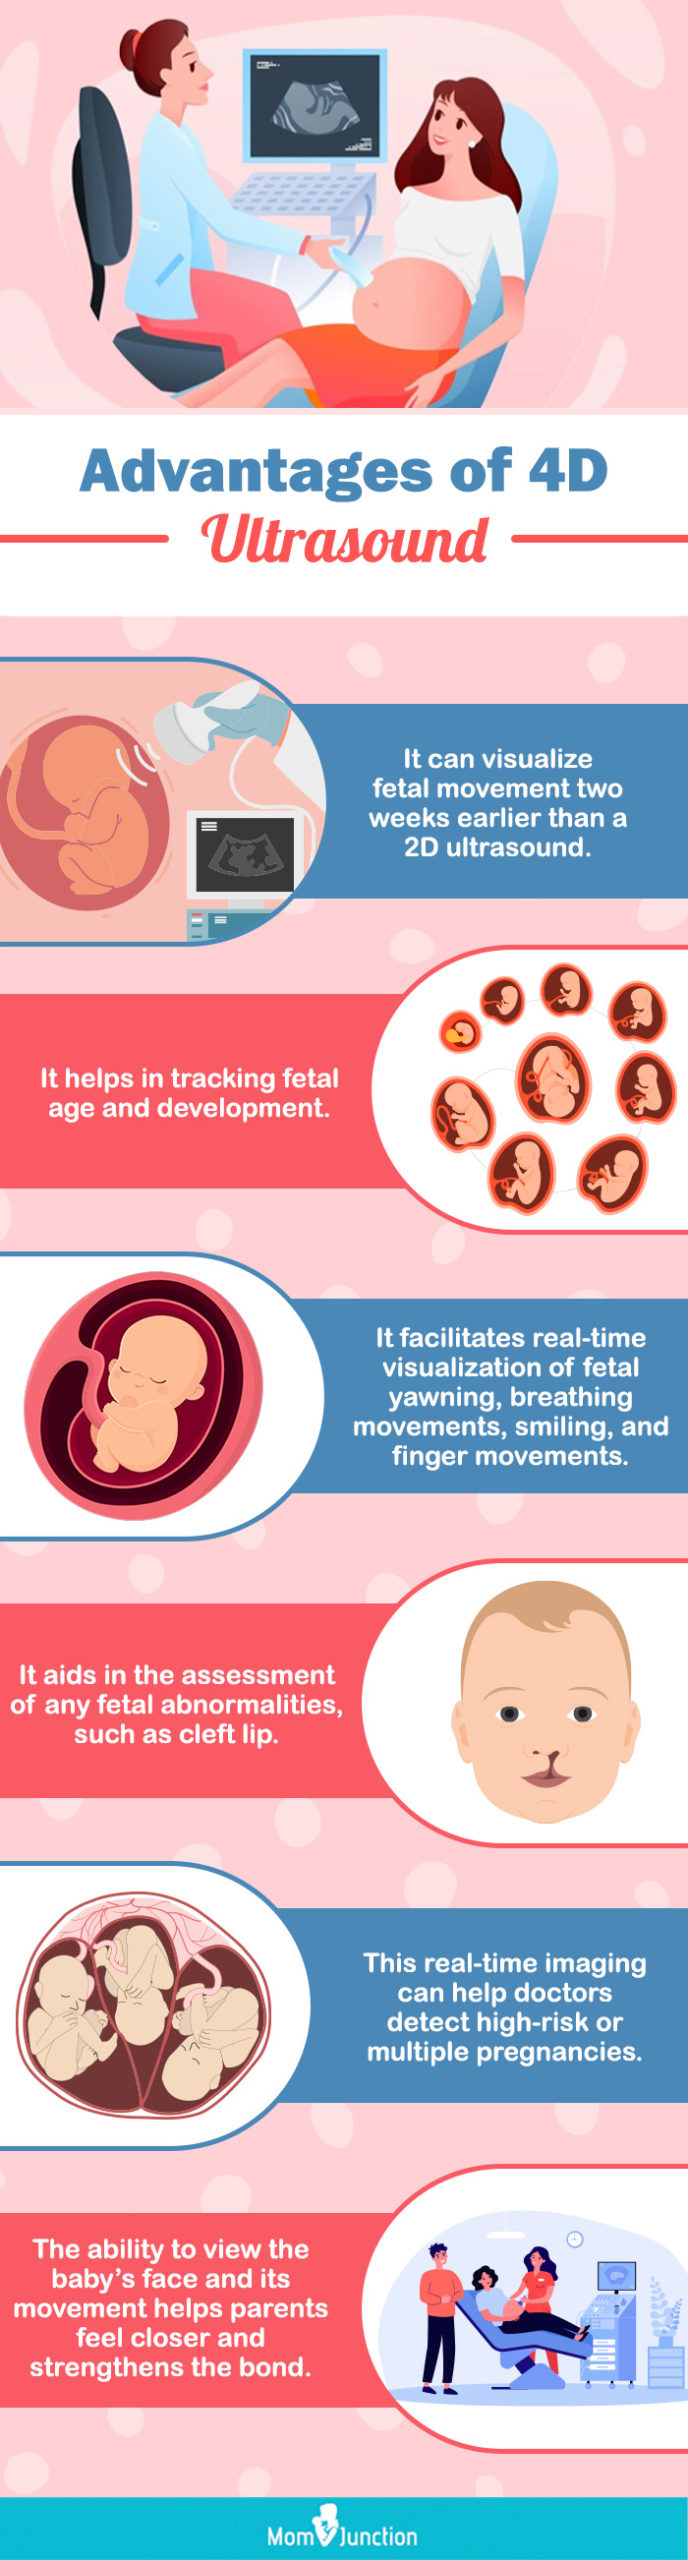 advantages of 4D ultrasound (infographic)